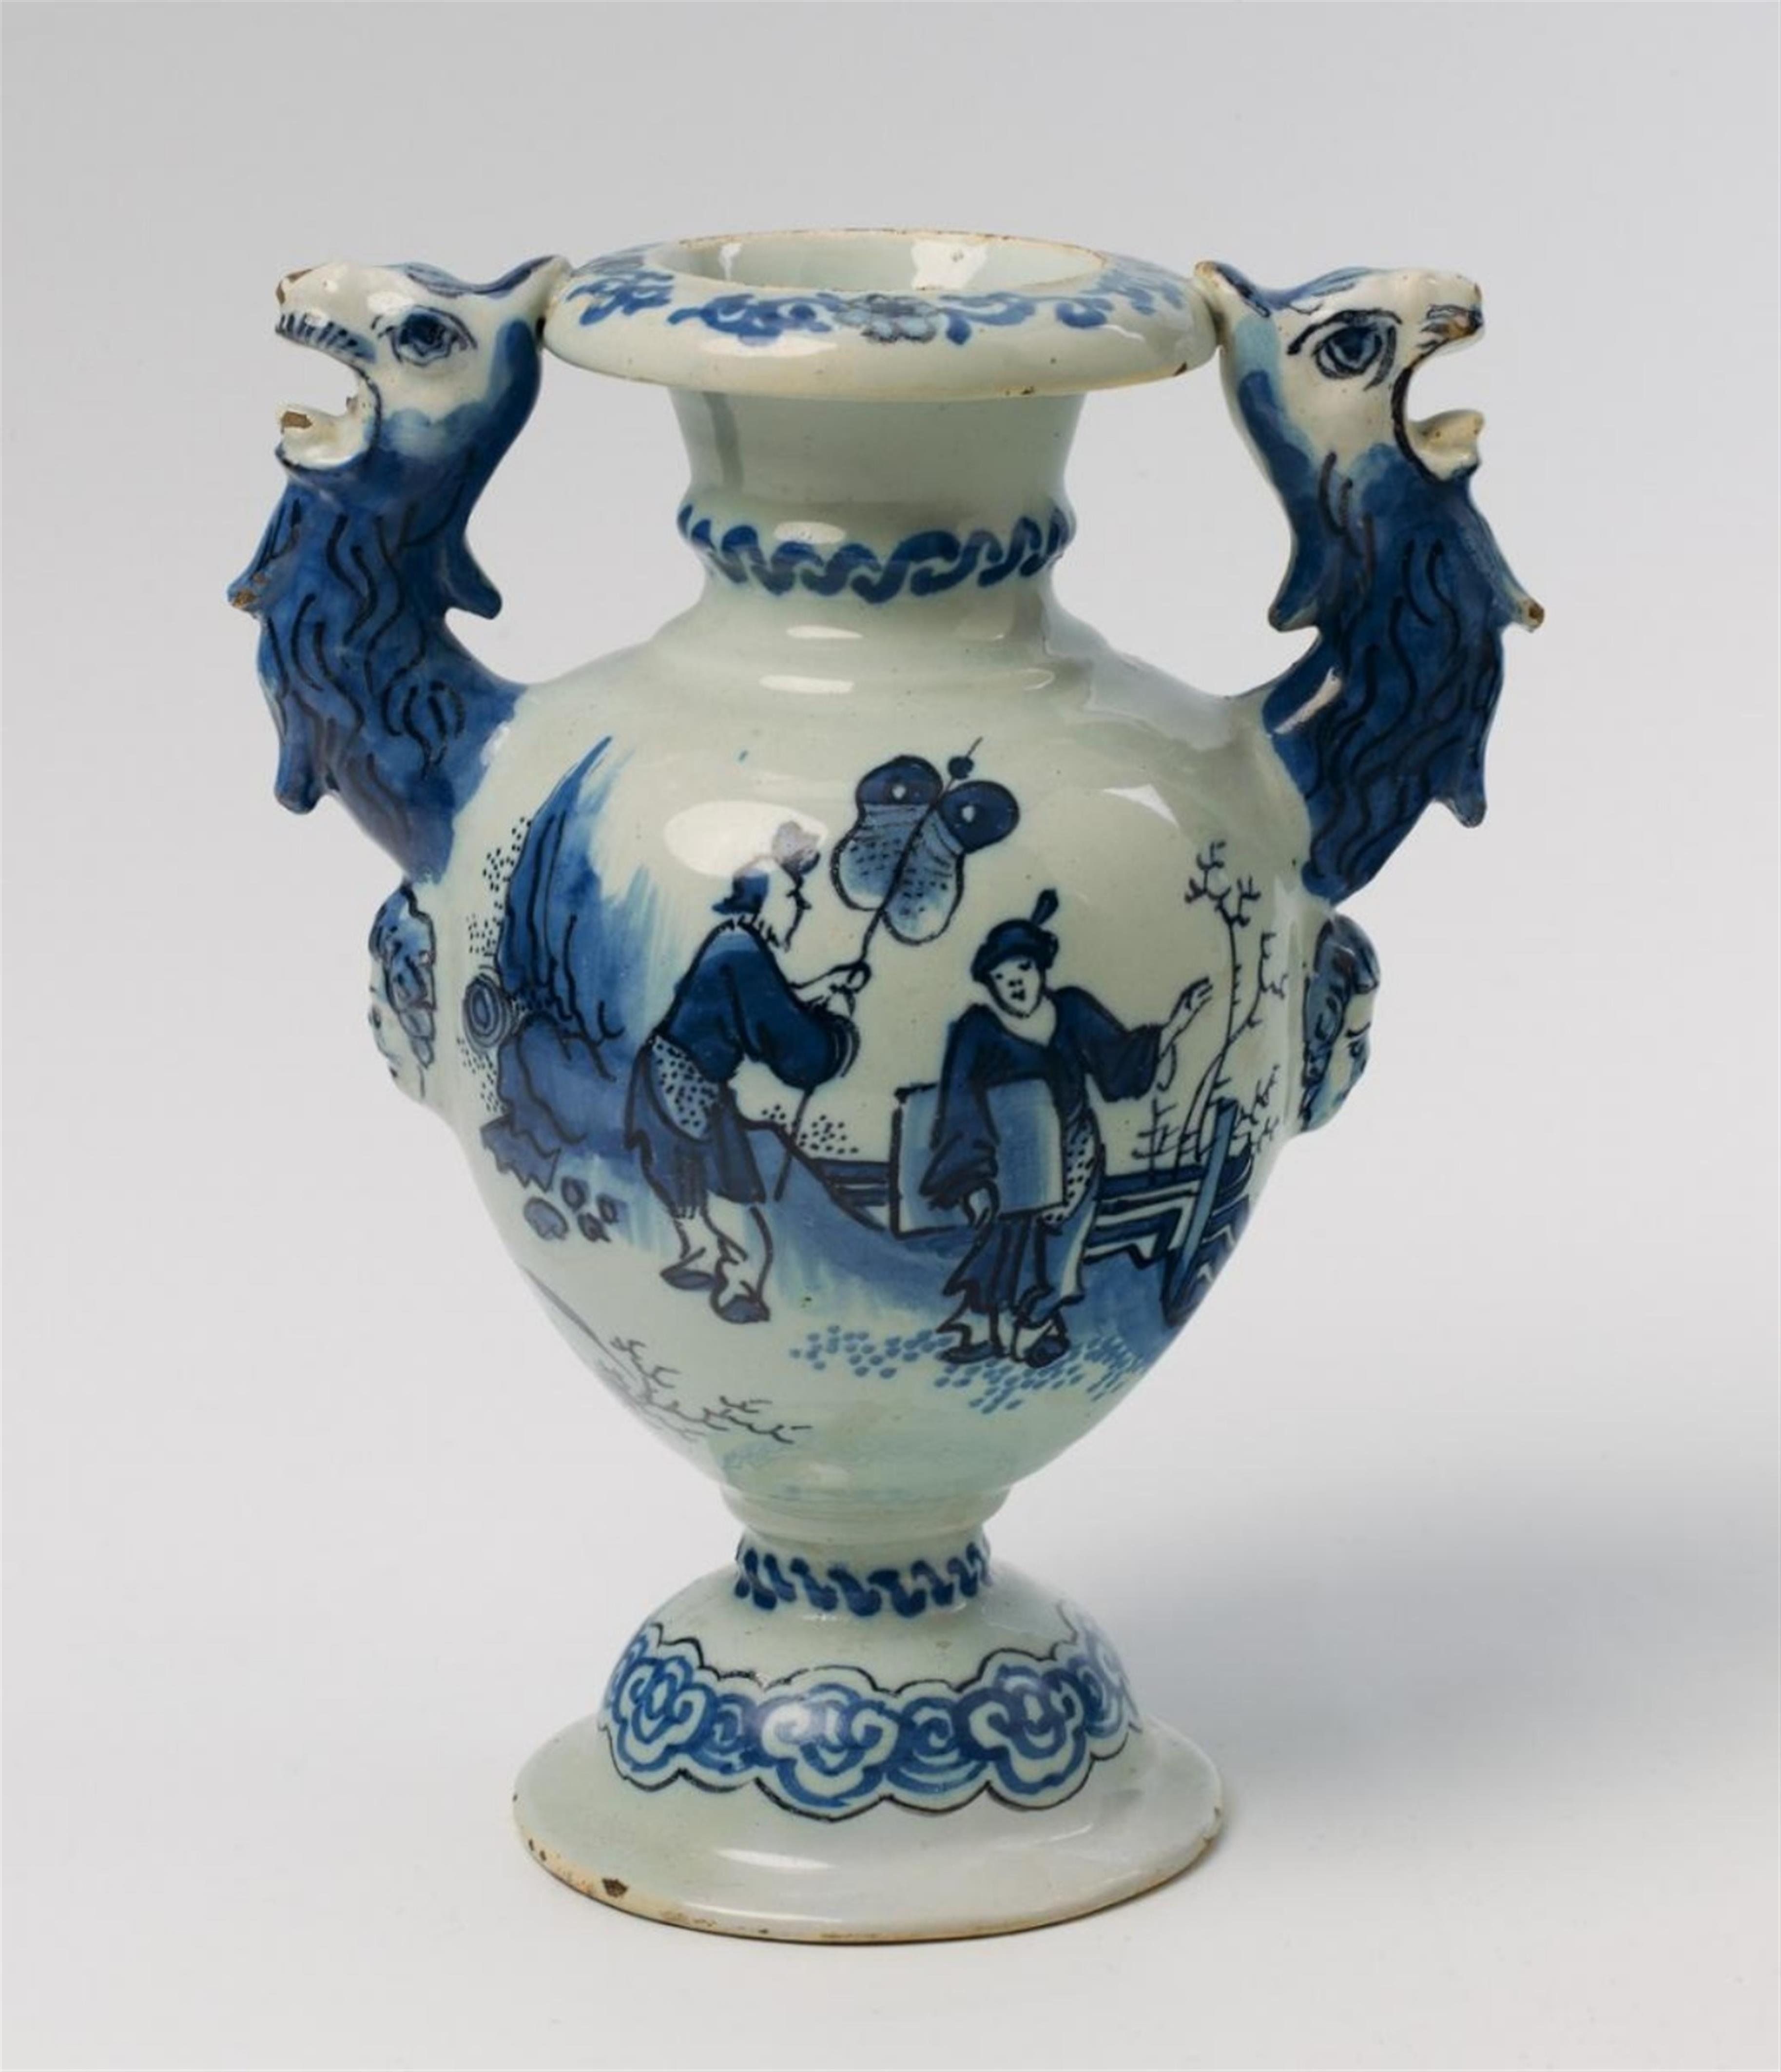 A faience albarello with the arms of the Zinzendorf family - image-1